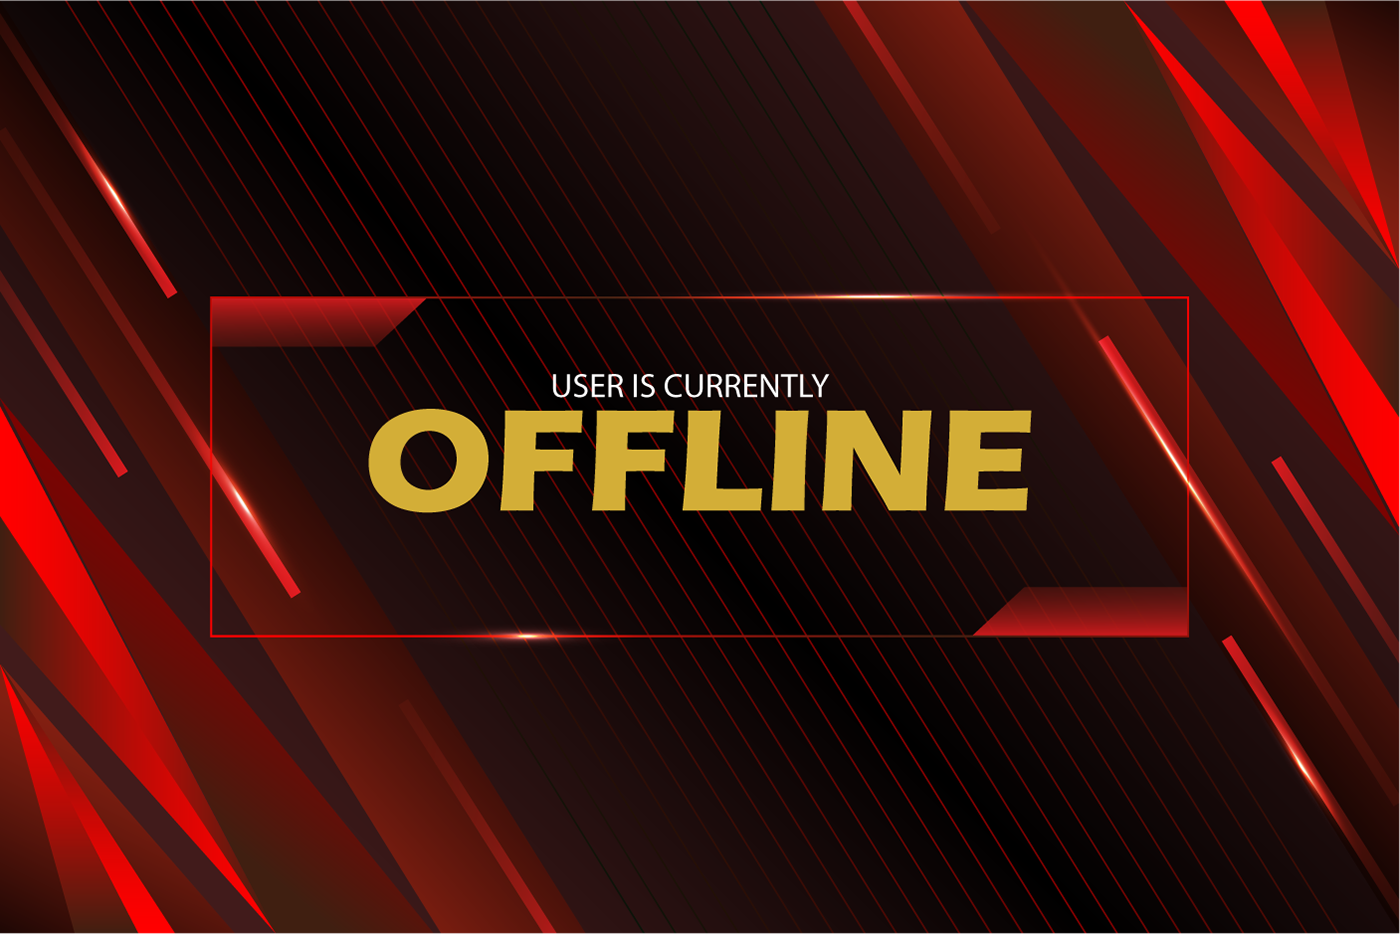 Twitch Screens twitch design Screen Design offline screen gaming design Gaming be right back screen gaming screens starting soon screen Twitch Screens pack